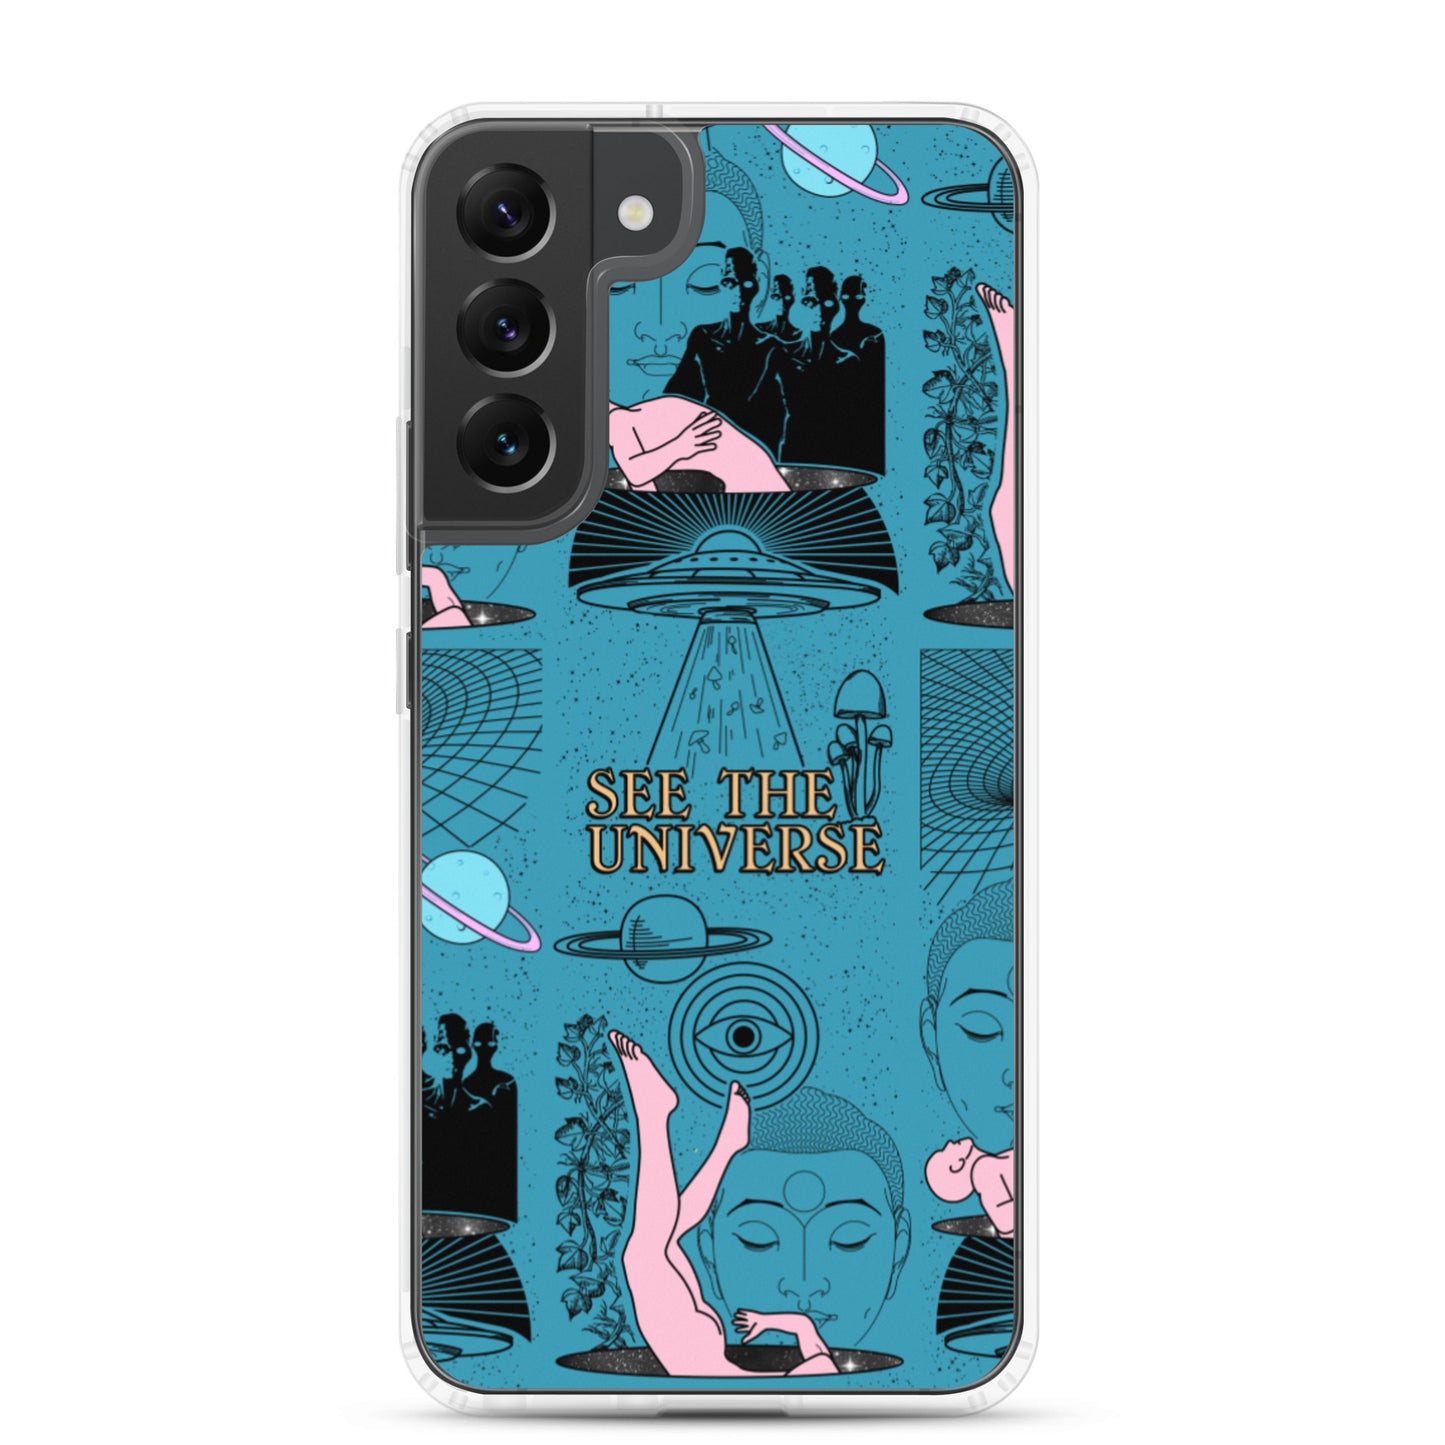 See The Universe Samsung Case